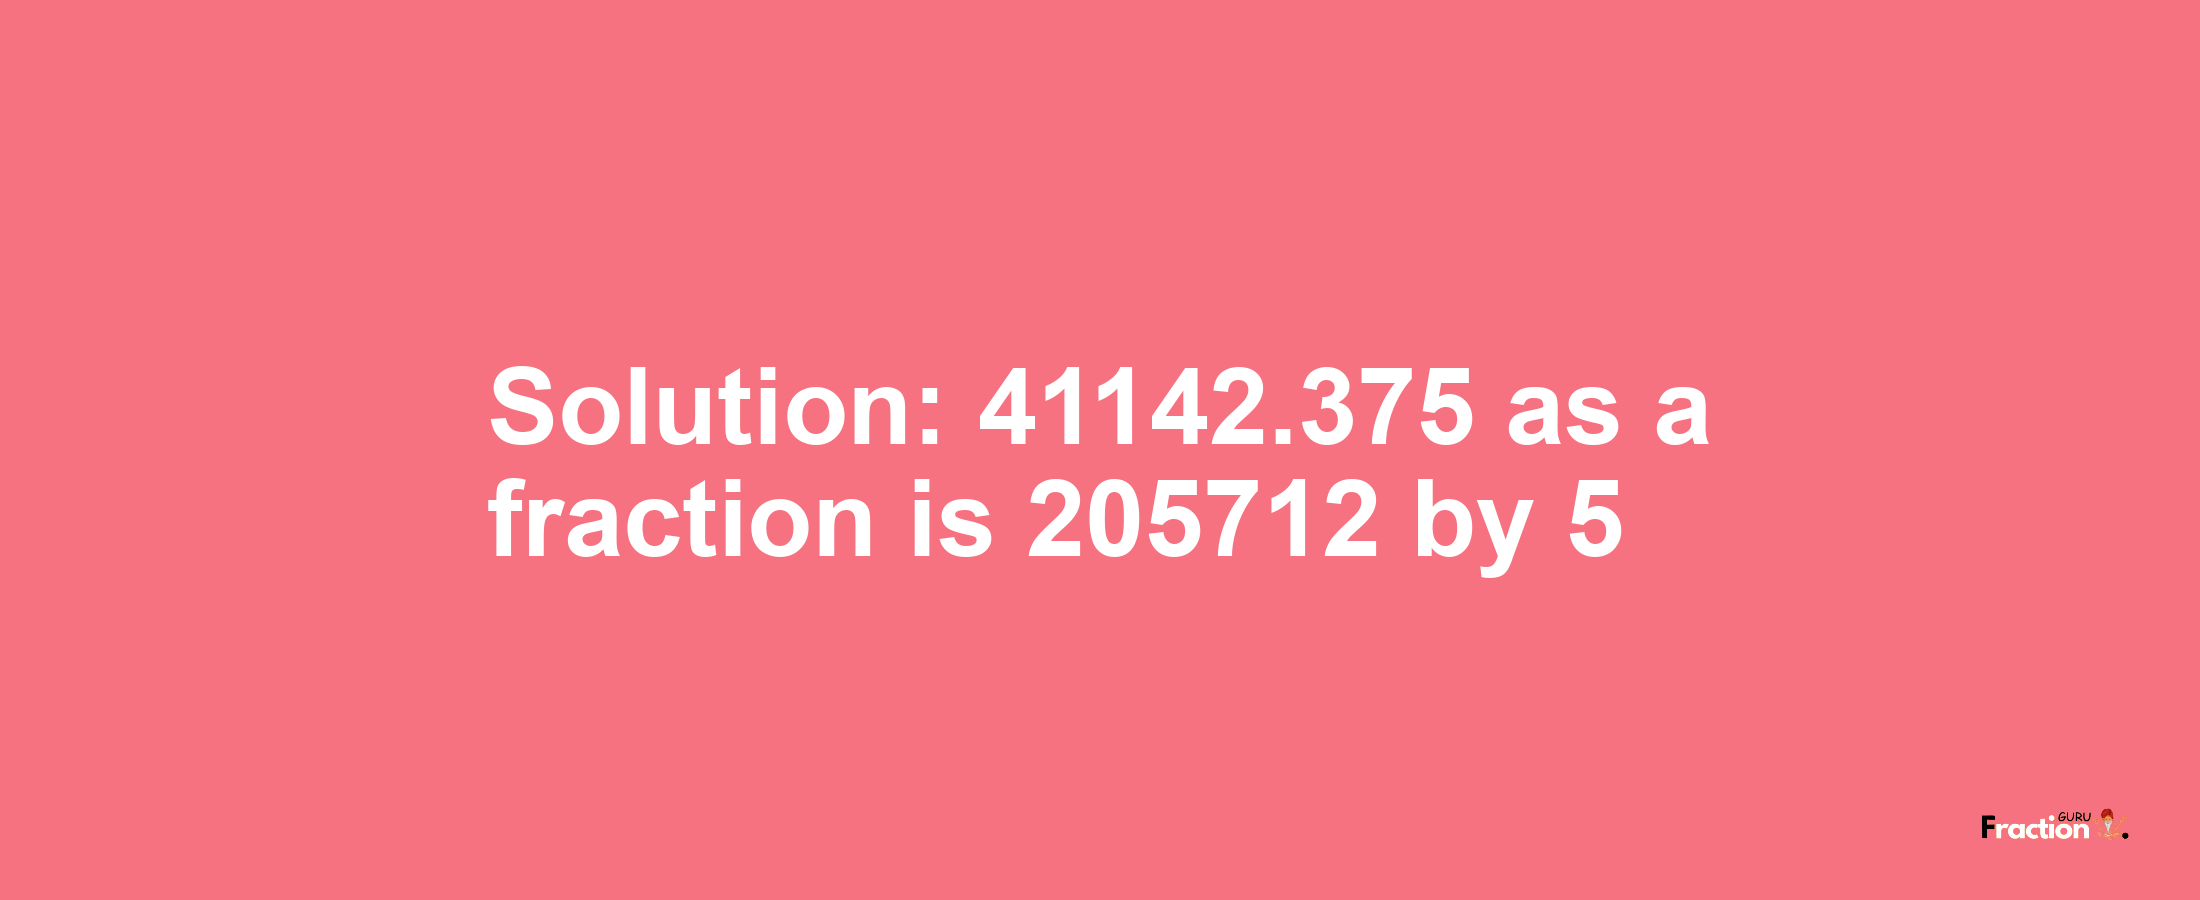 Solution:41142.375 as a fraction is 205712/5